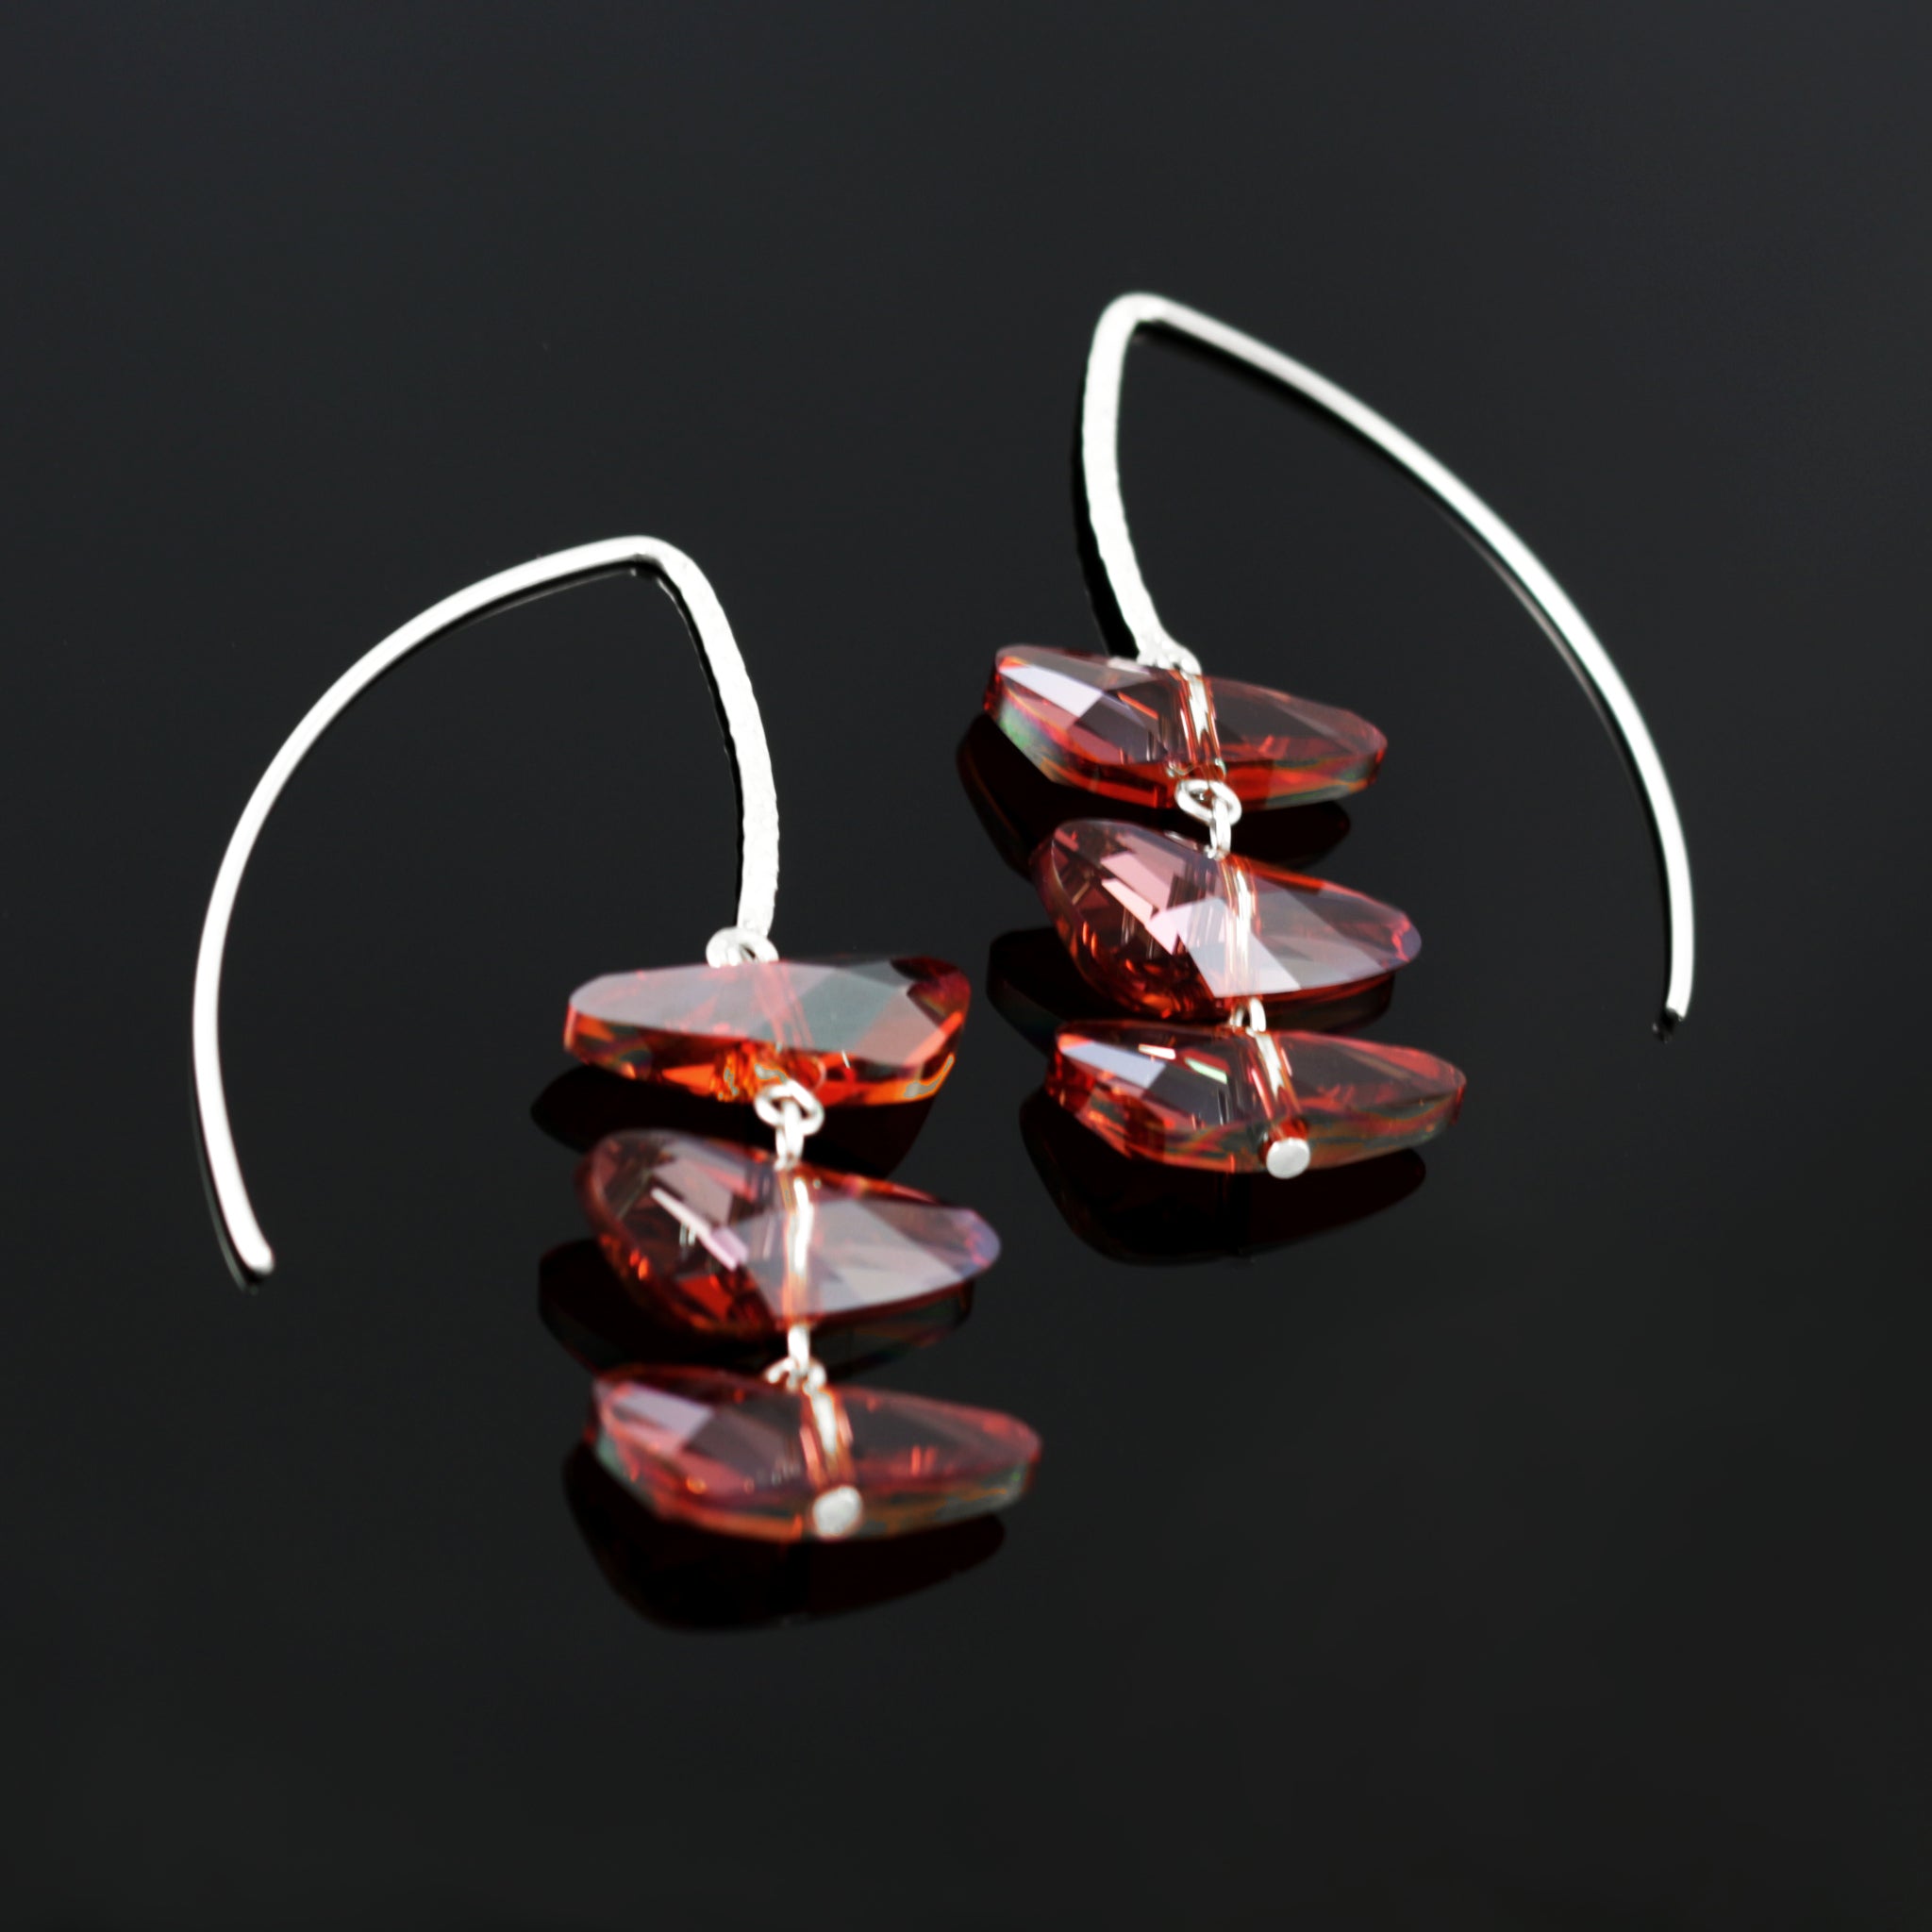 Reflections Earrings in Red Shimmer